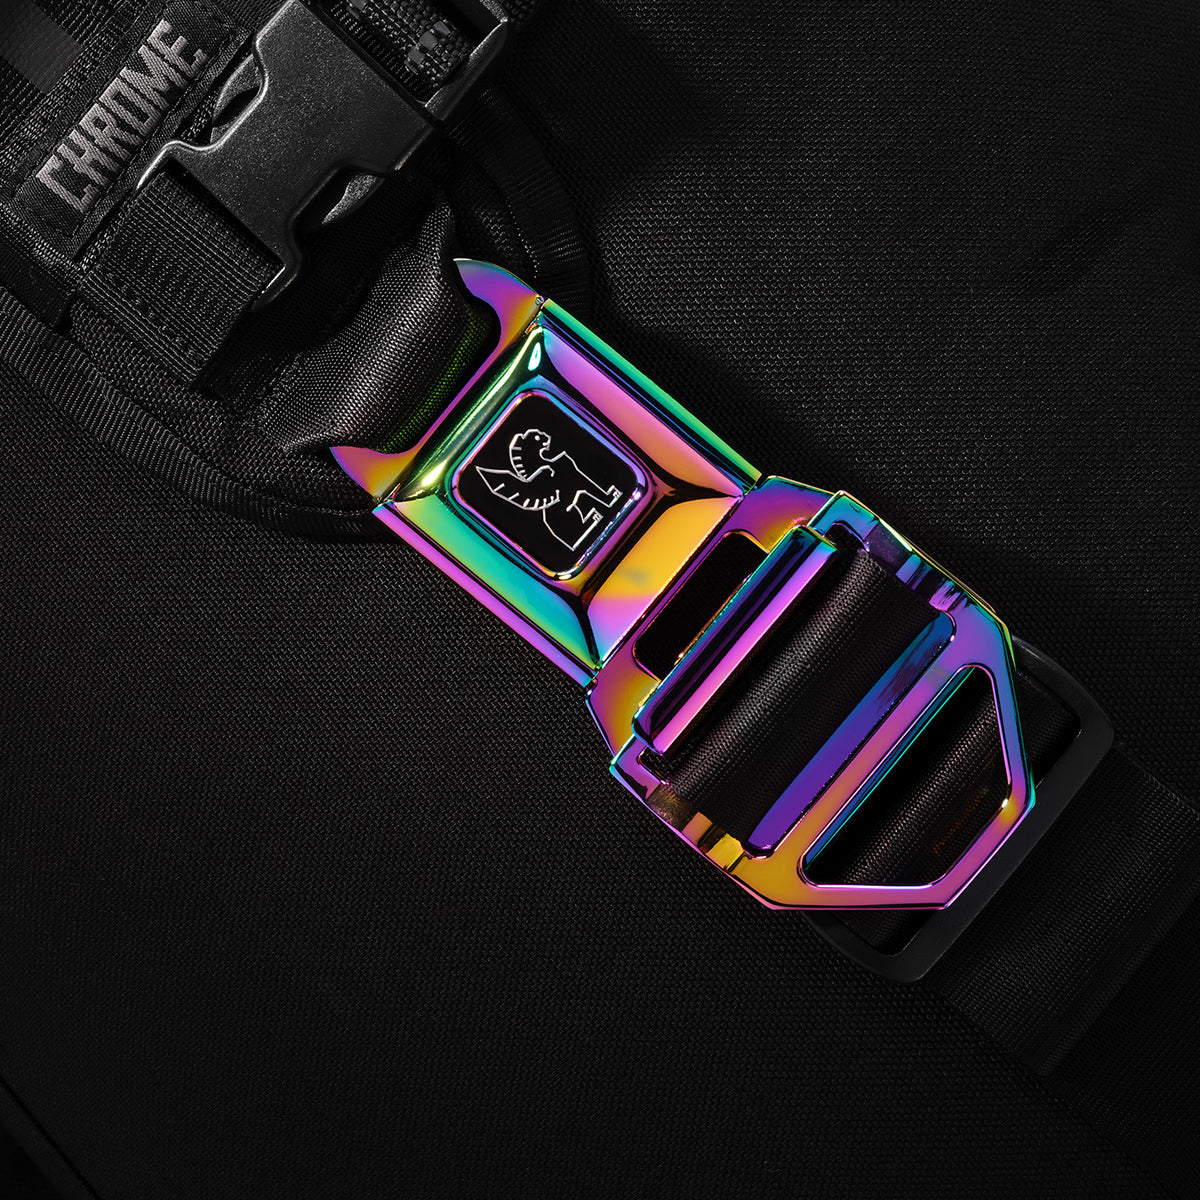 Gay's Okay Collection navigation seatbelt buckle in rainbow reflective